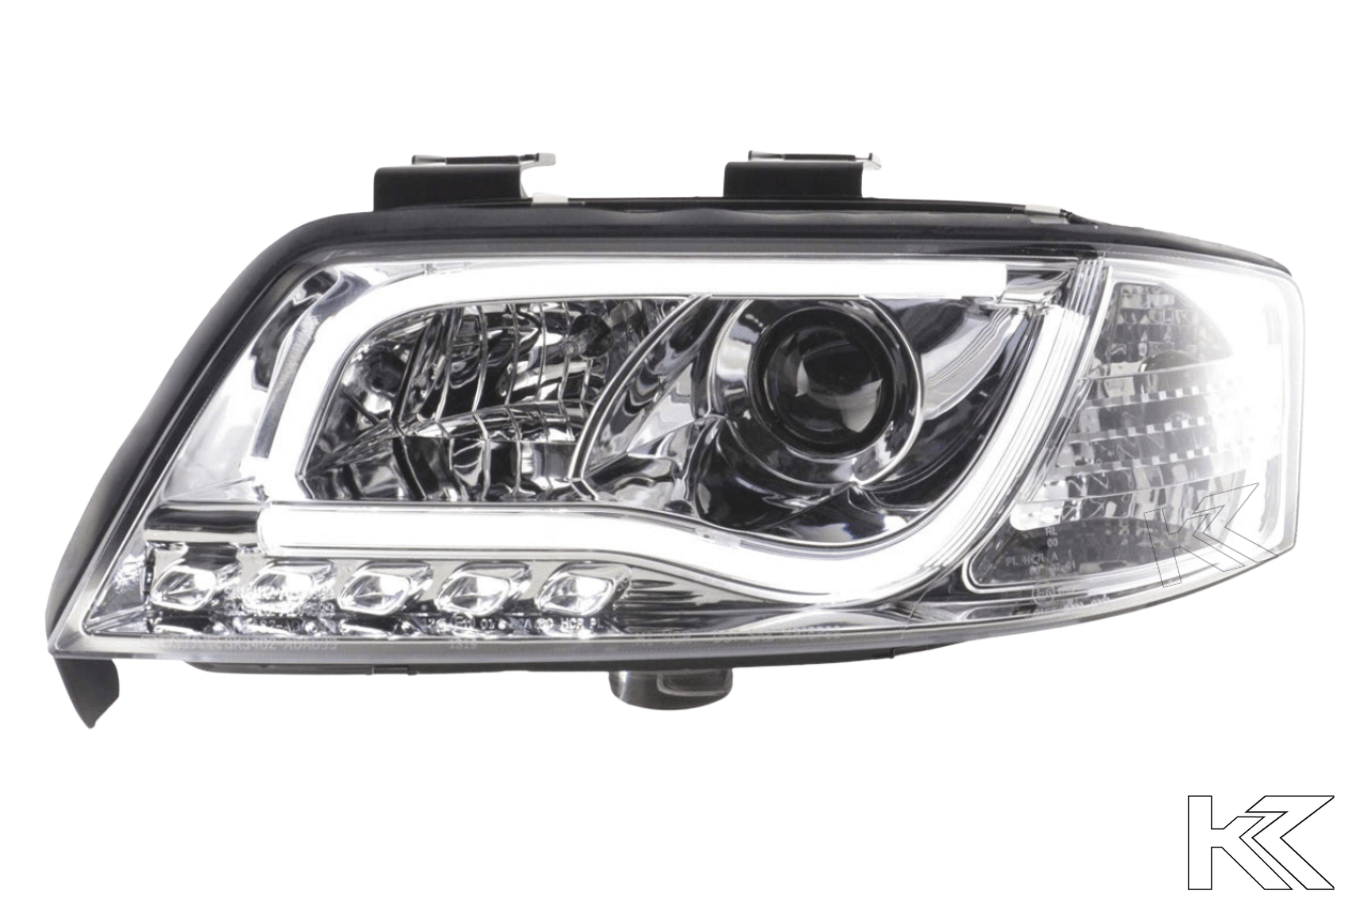 Audi A6 (C5 4B) Chrome LED Headlights with Daytime Running Lights (1997-2001) - With R87 approval - K2 Industries